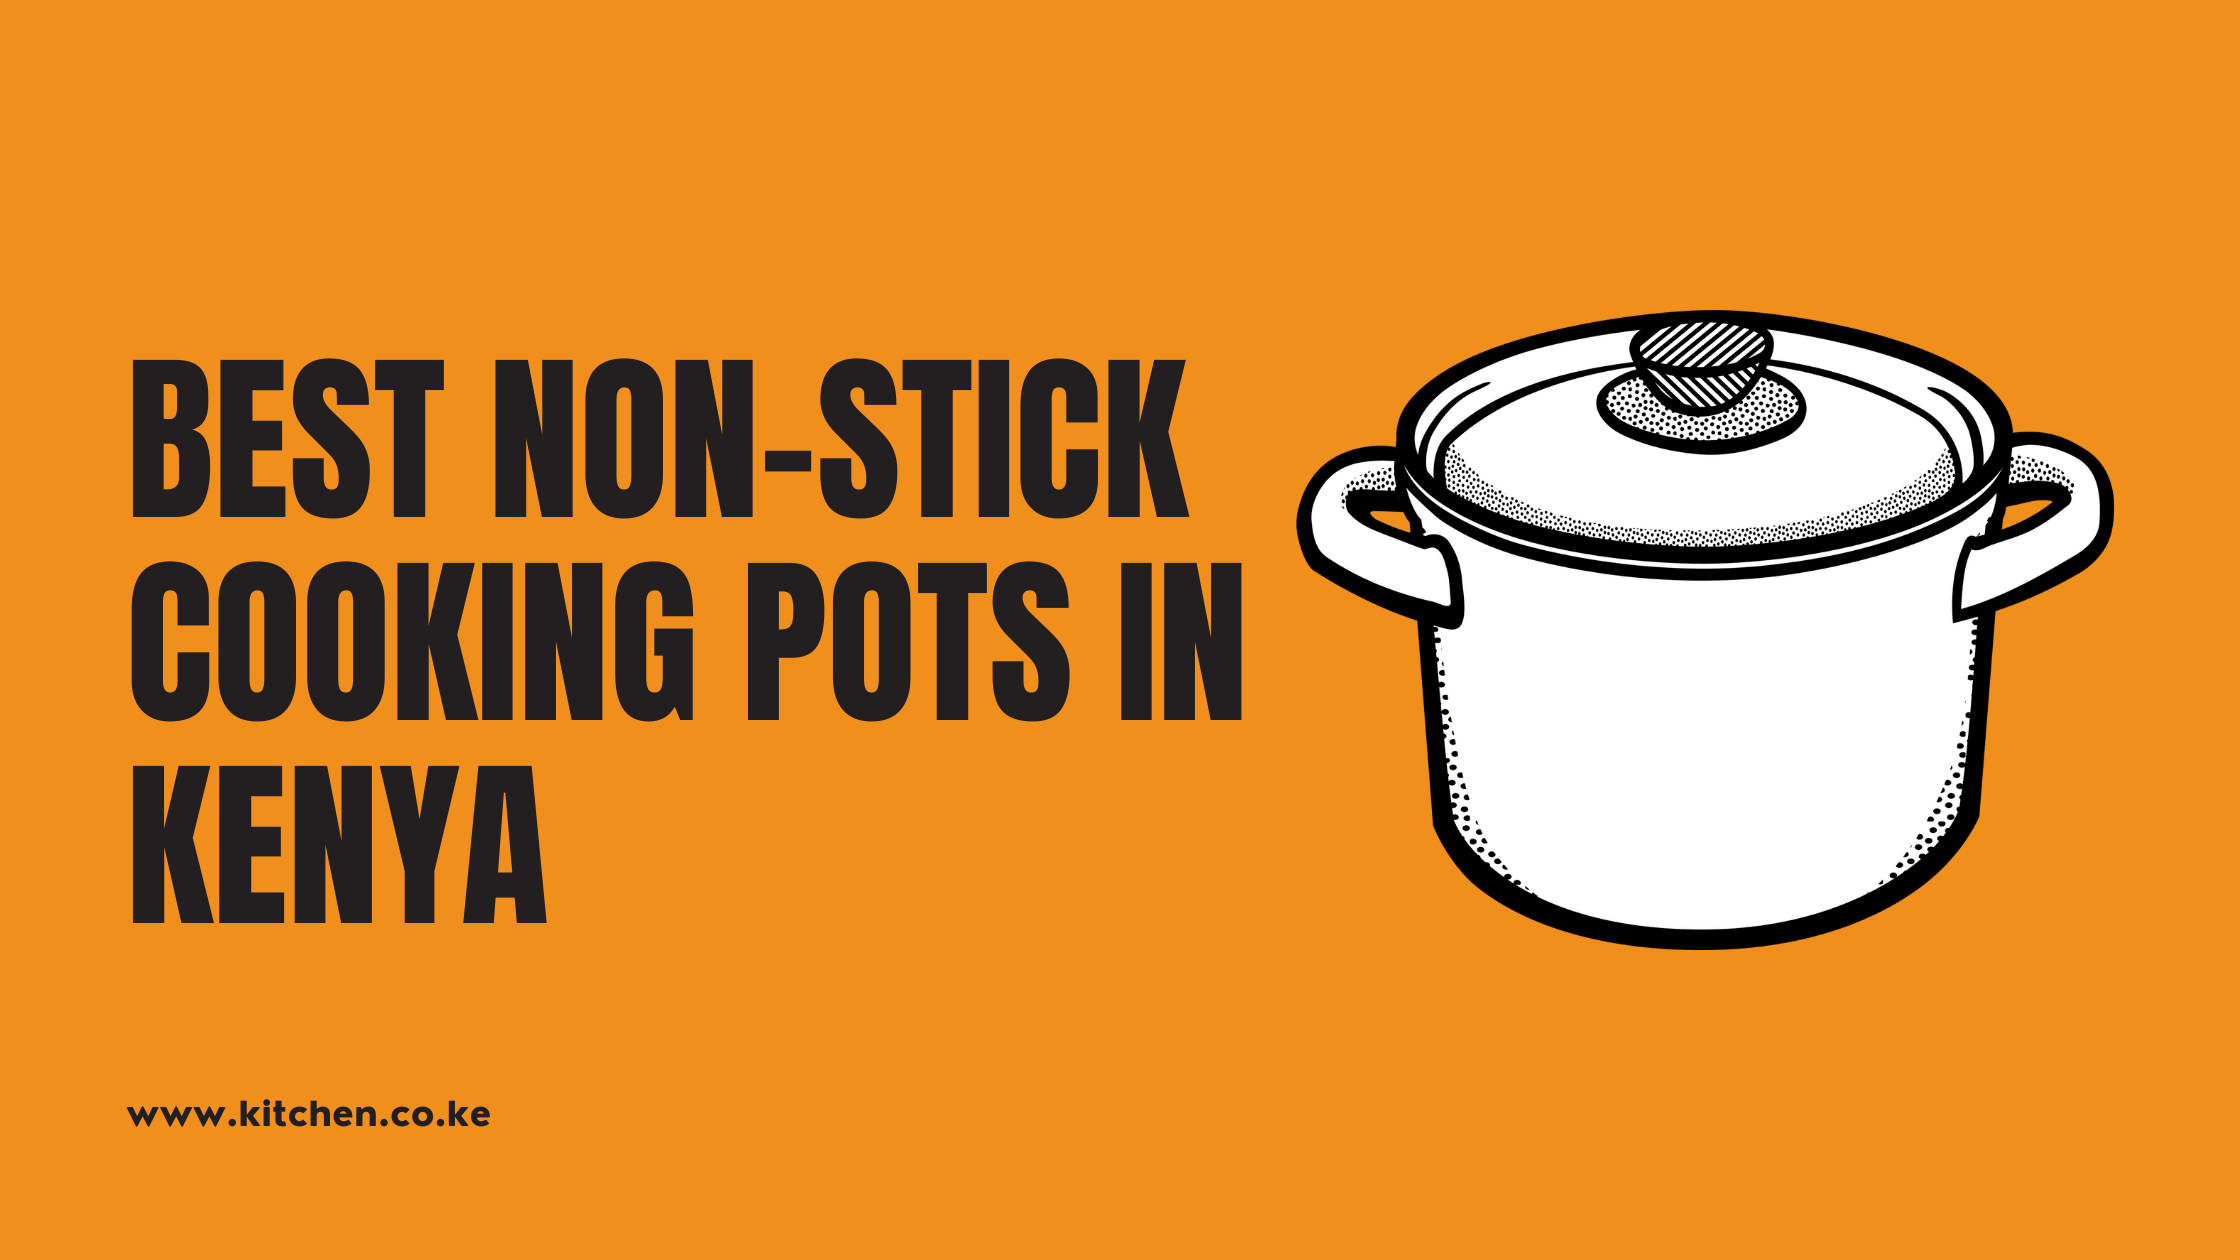 8 Best Non stick Cooking Pots in Kenya And Their Prices